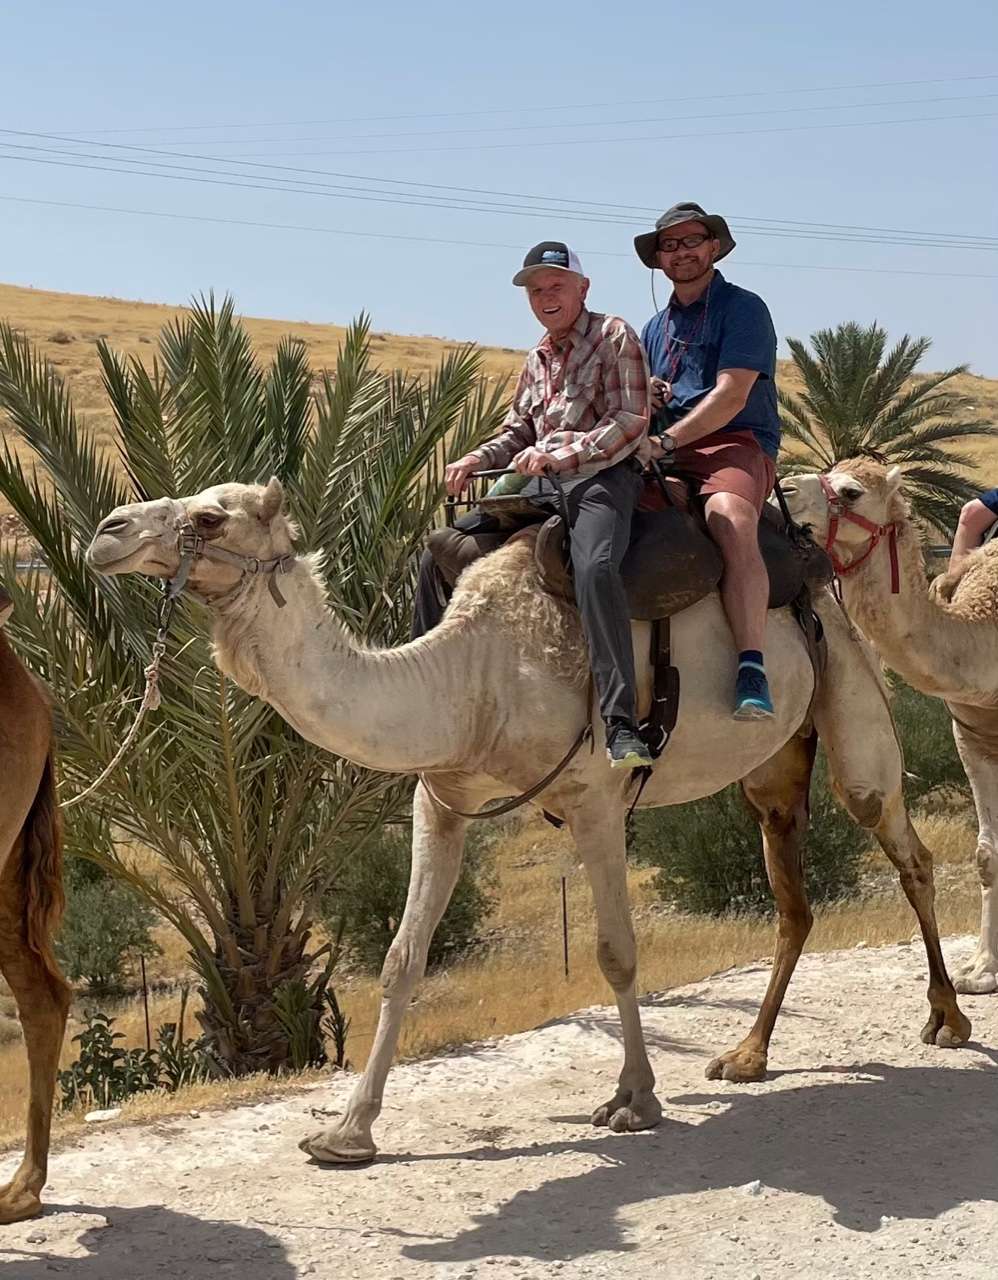 Another angle of Jake and Richard on a Camel